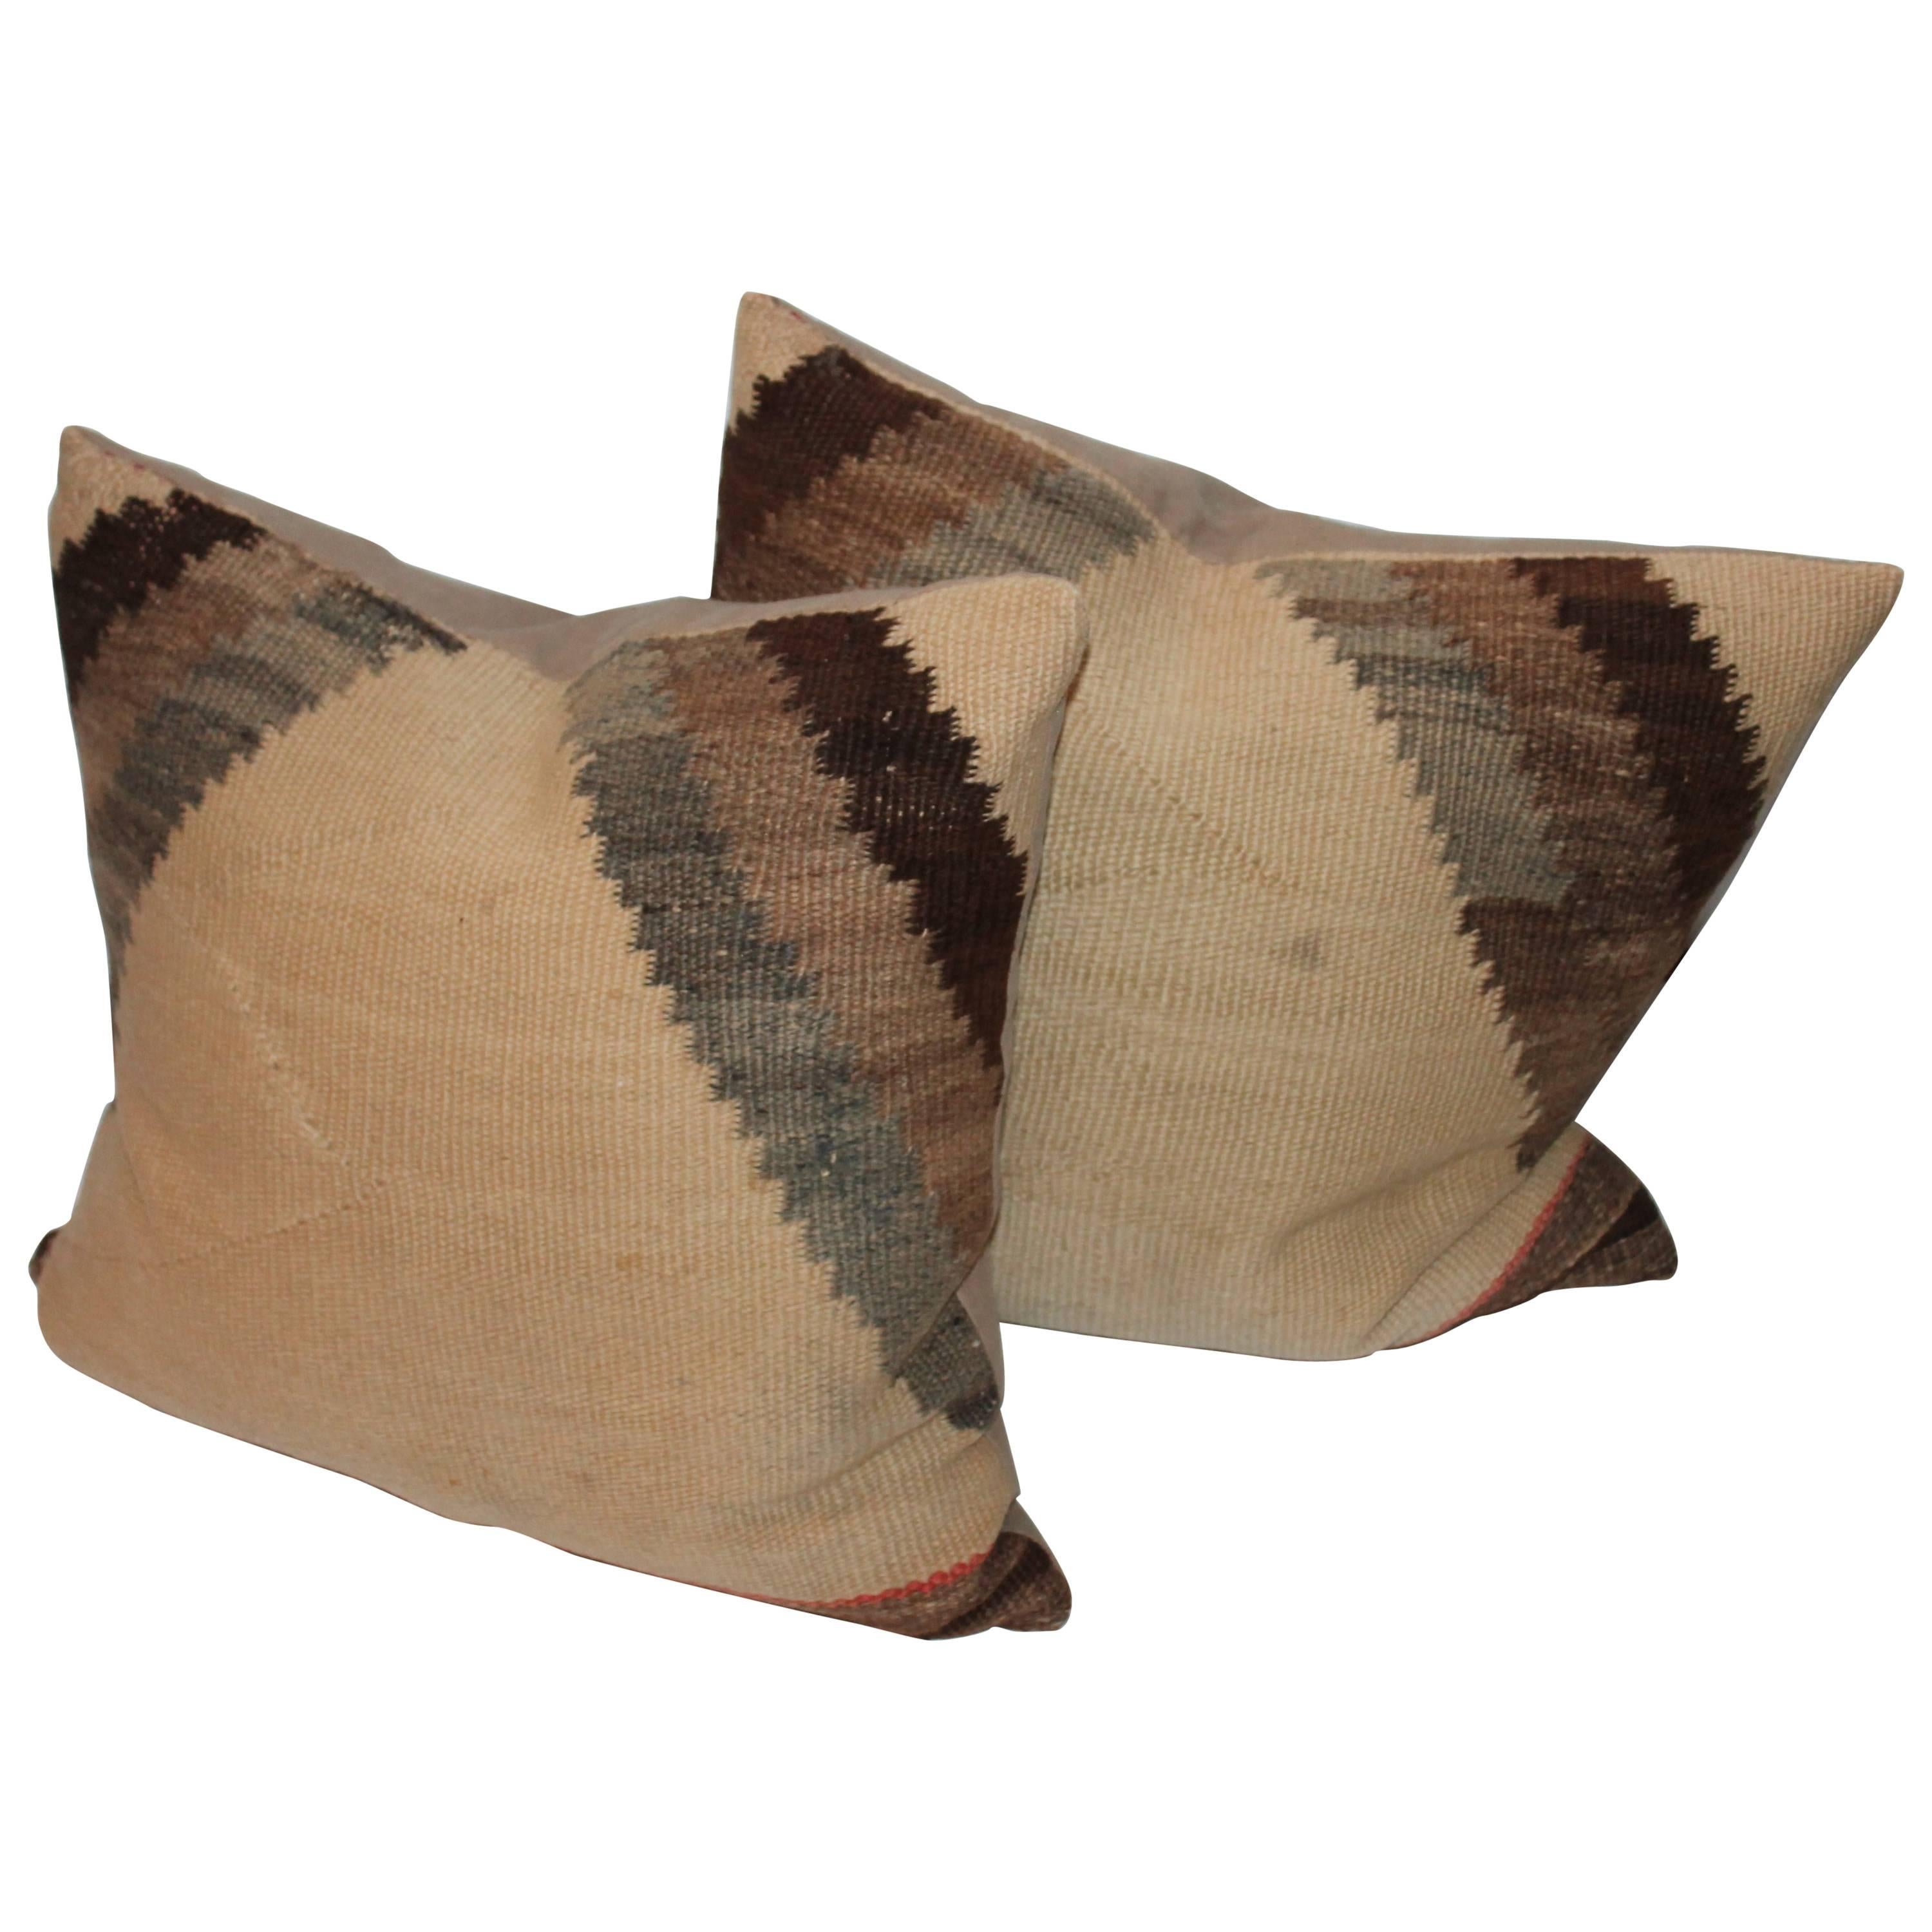 Pair of Early 19th Century Brown and Tan Navajo Weaving Pillows